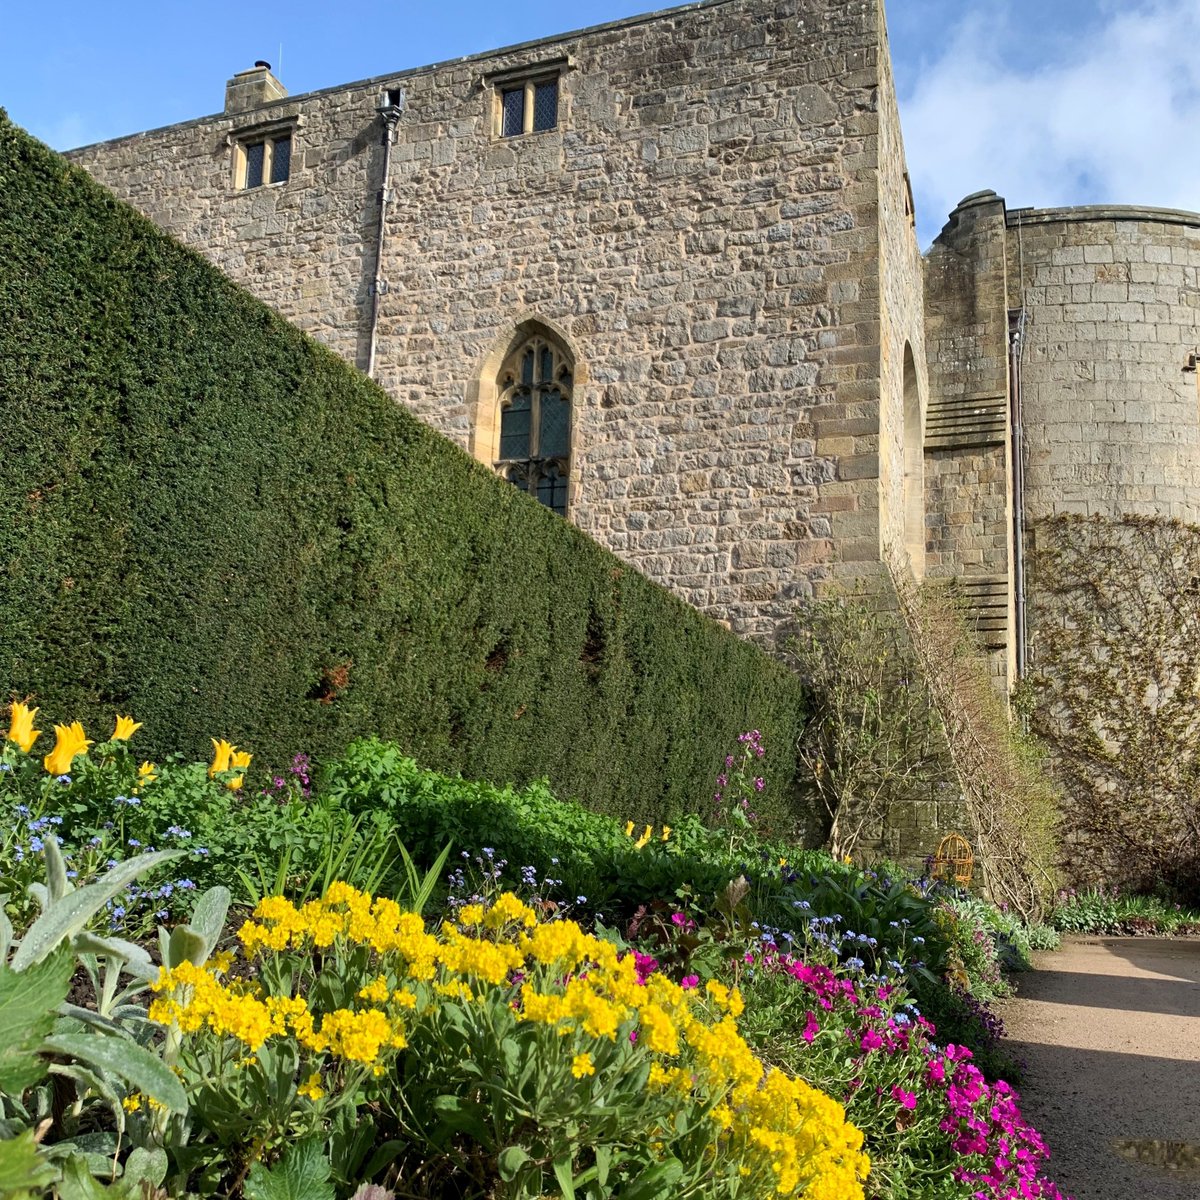 Spring is well and truly making its appearance in the gardens at Chirk Castle. From vibrant rhododendrons, azaleas and camellias to magnolias, cherry blossom and bluebells, there’s something for everyone. Details here: bit.ly/3PdxpXS #BlossomWatch #ChirkCastle #Spring